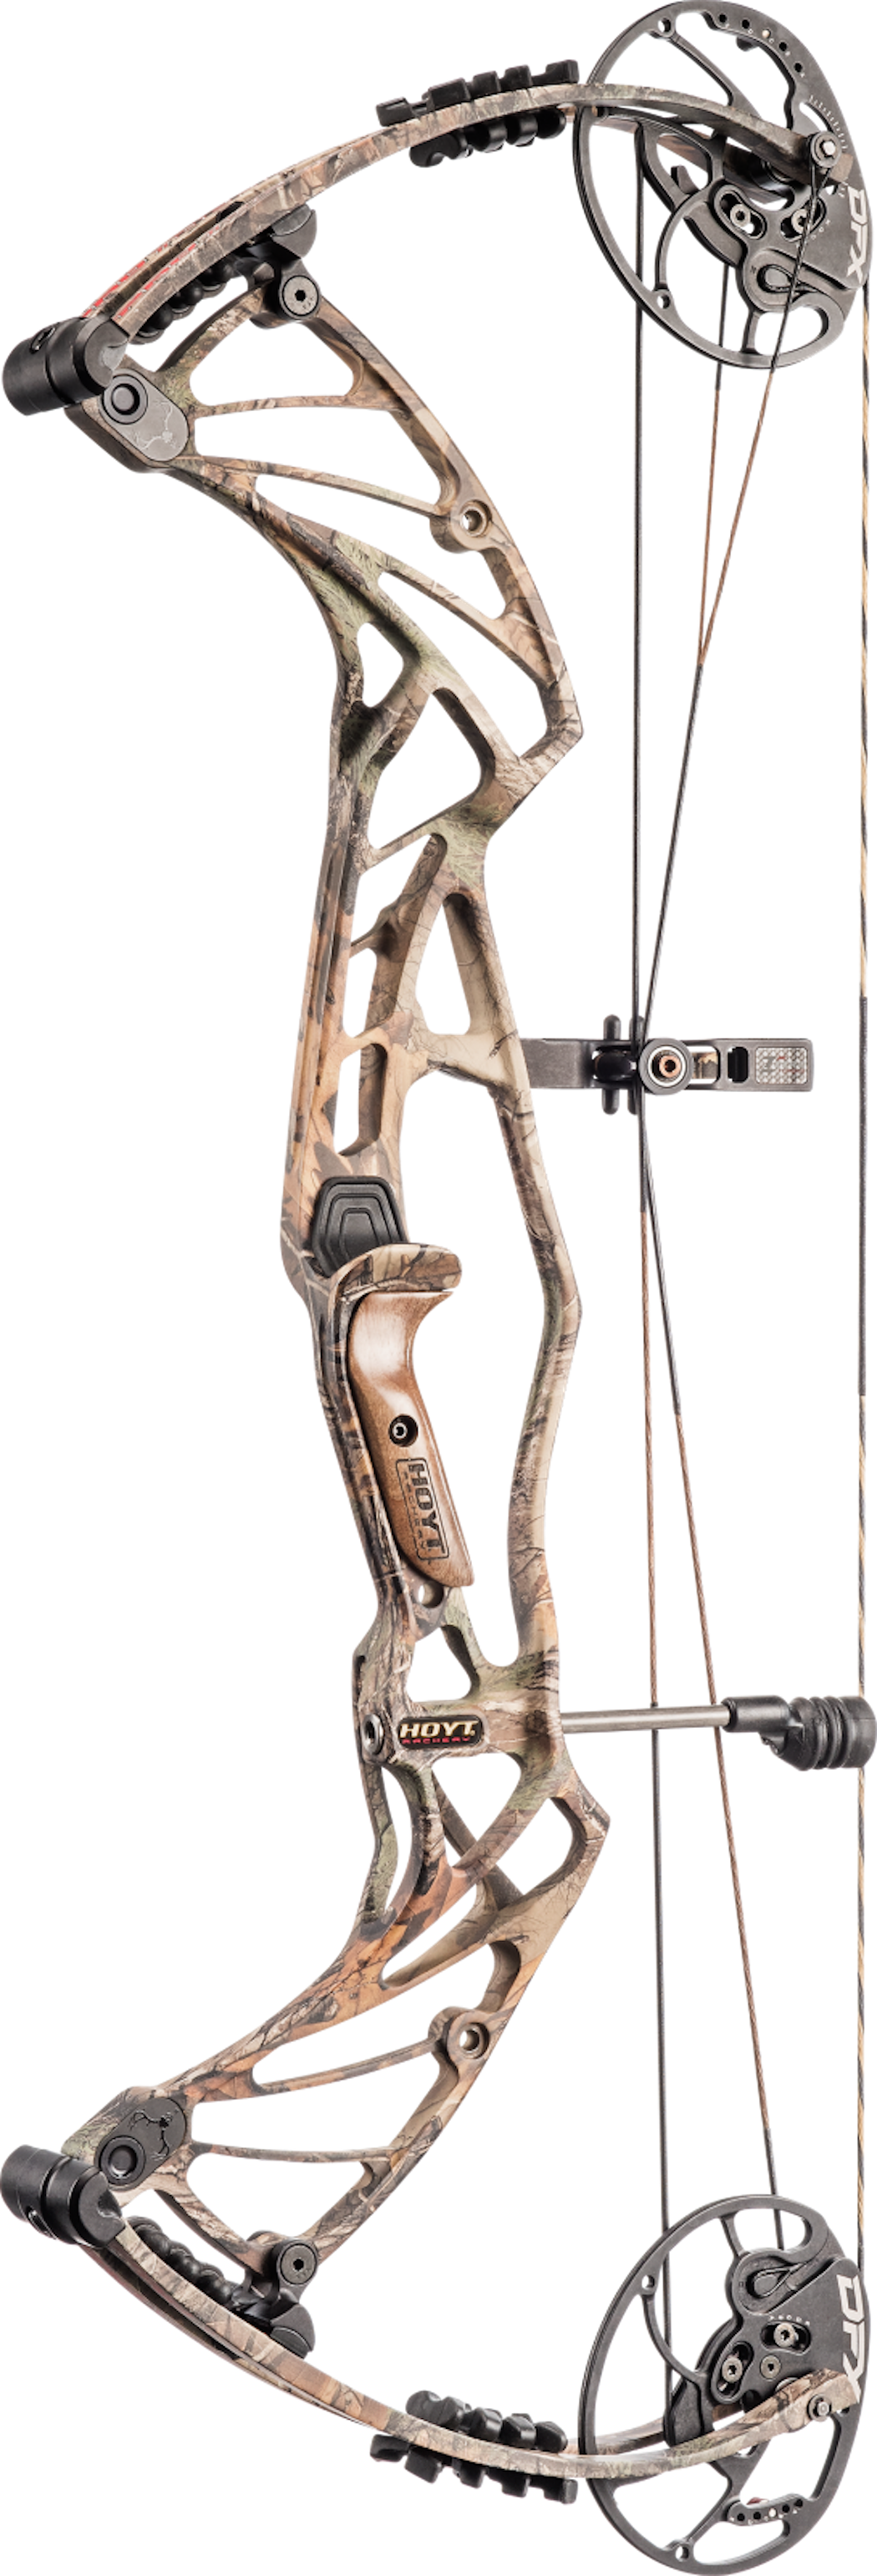 The 2017 Hoyt Pro Defiant in Realtree Xtra